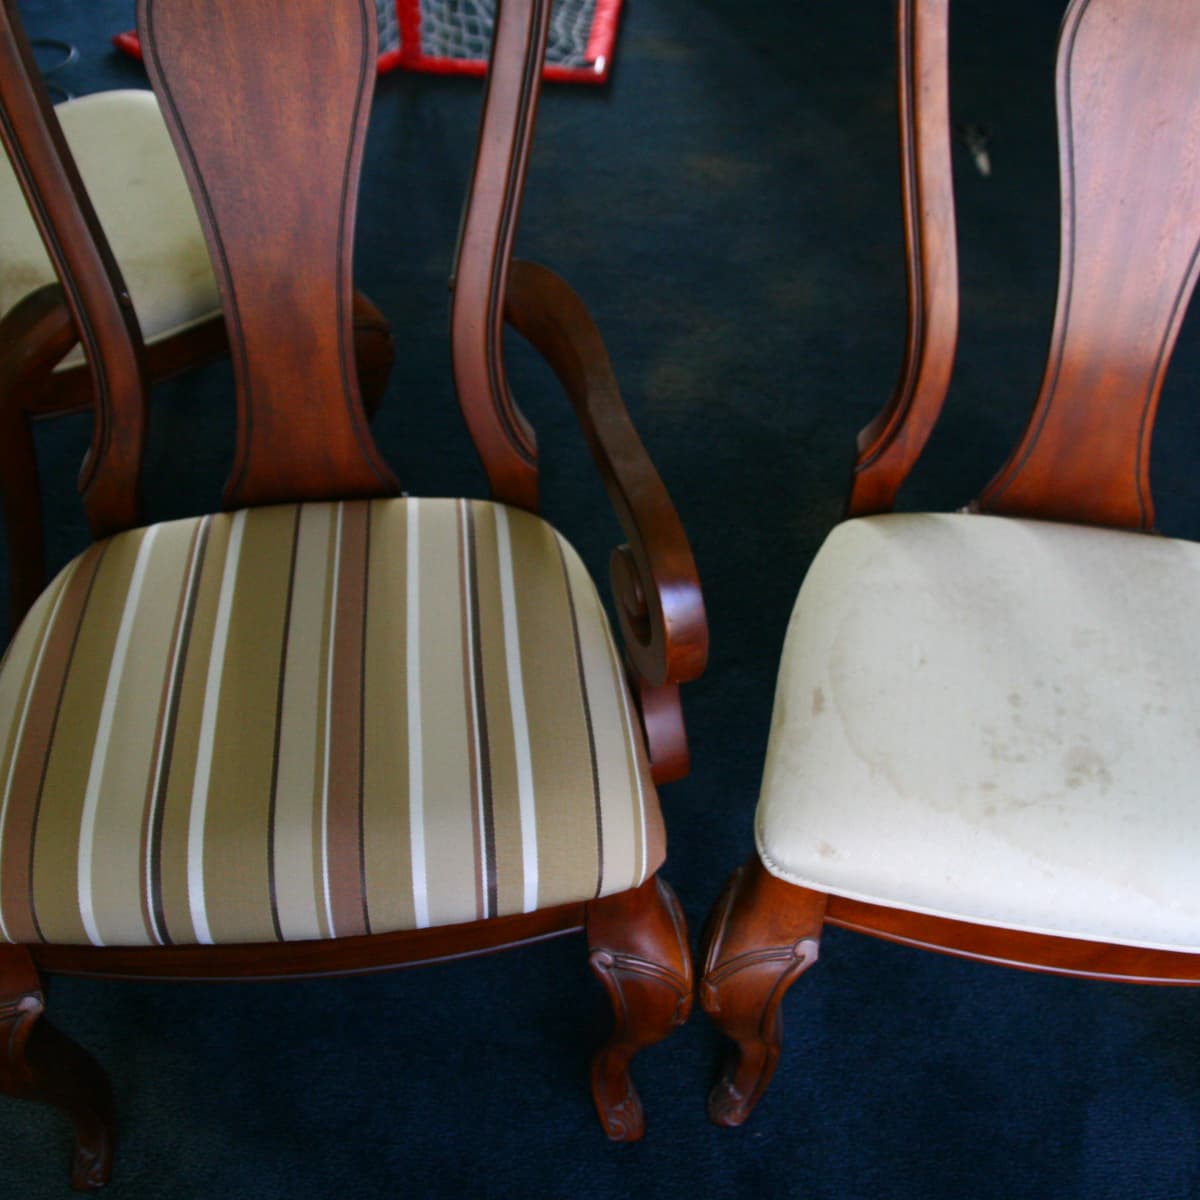 How To Reupholster A Dining Room Chair, How Much Does It Cost To Reupholster A Leather Chair